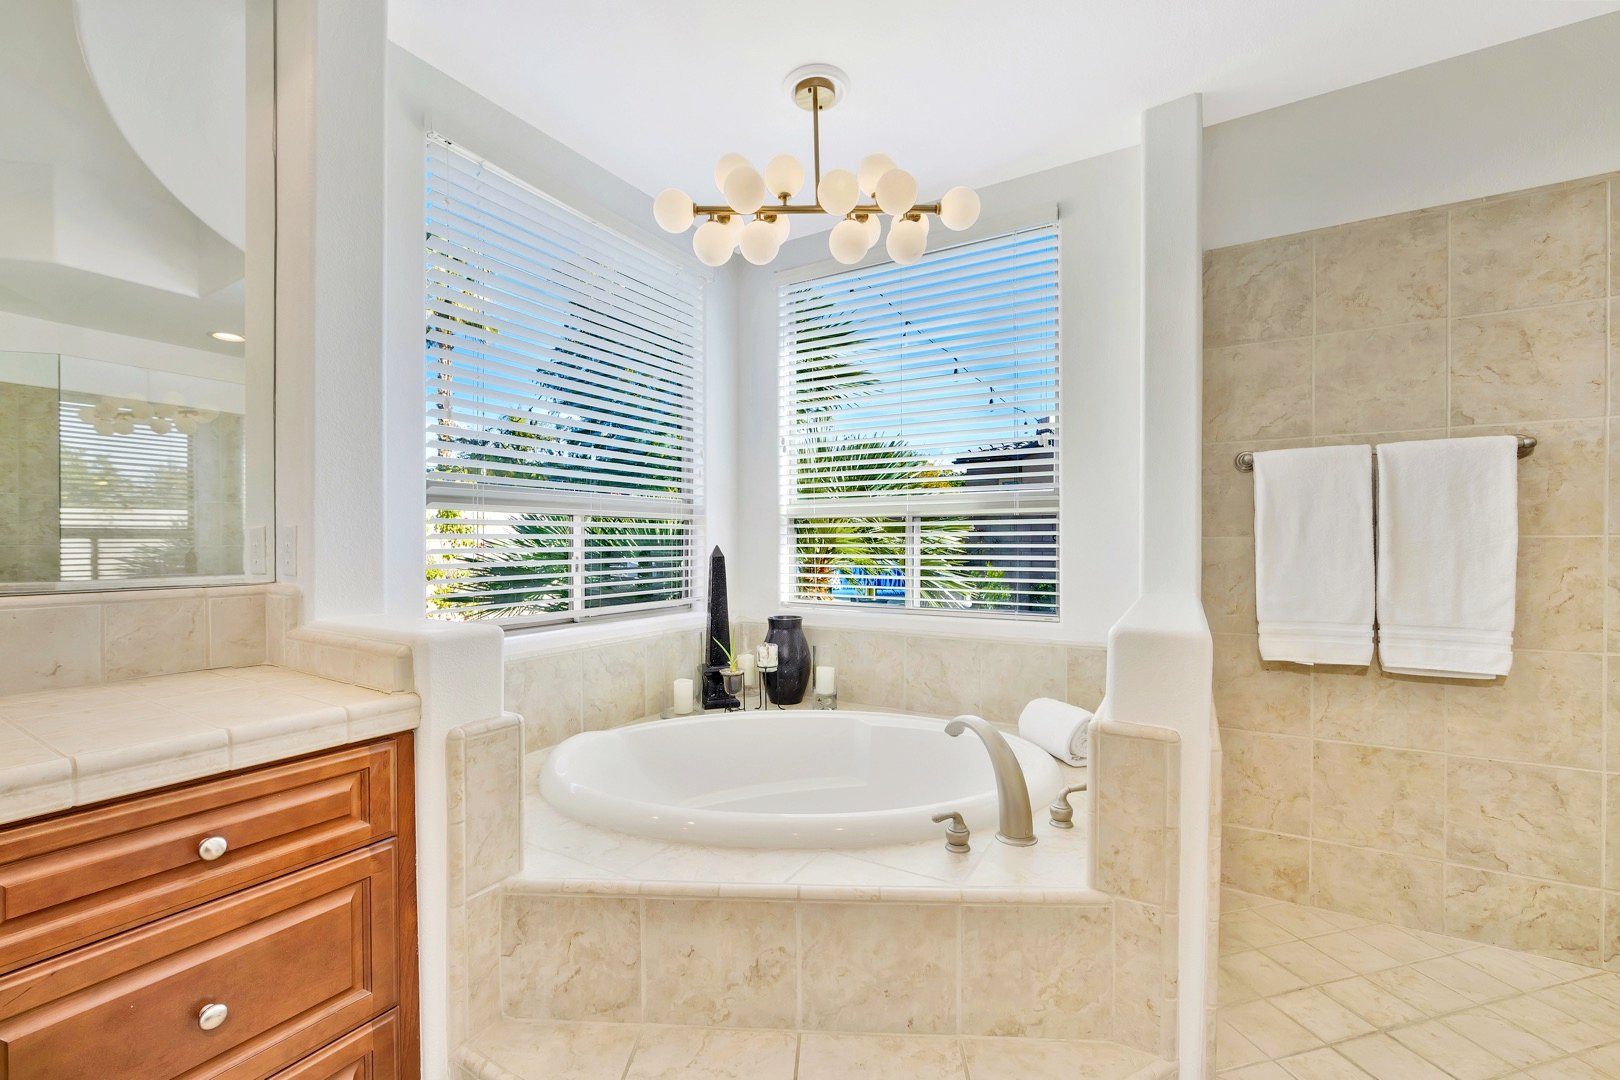 Take a relaxing bath in the huge master tub.